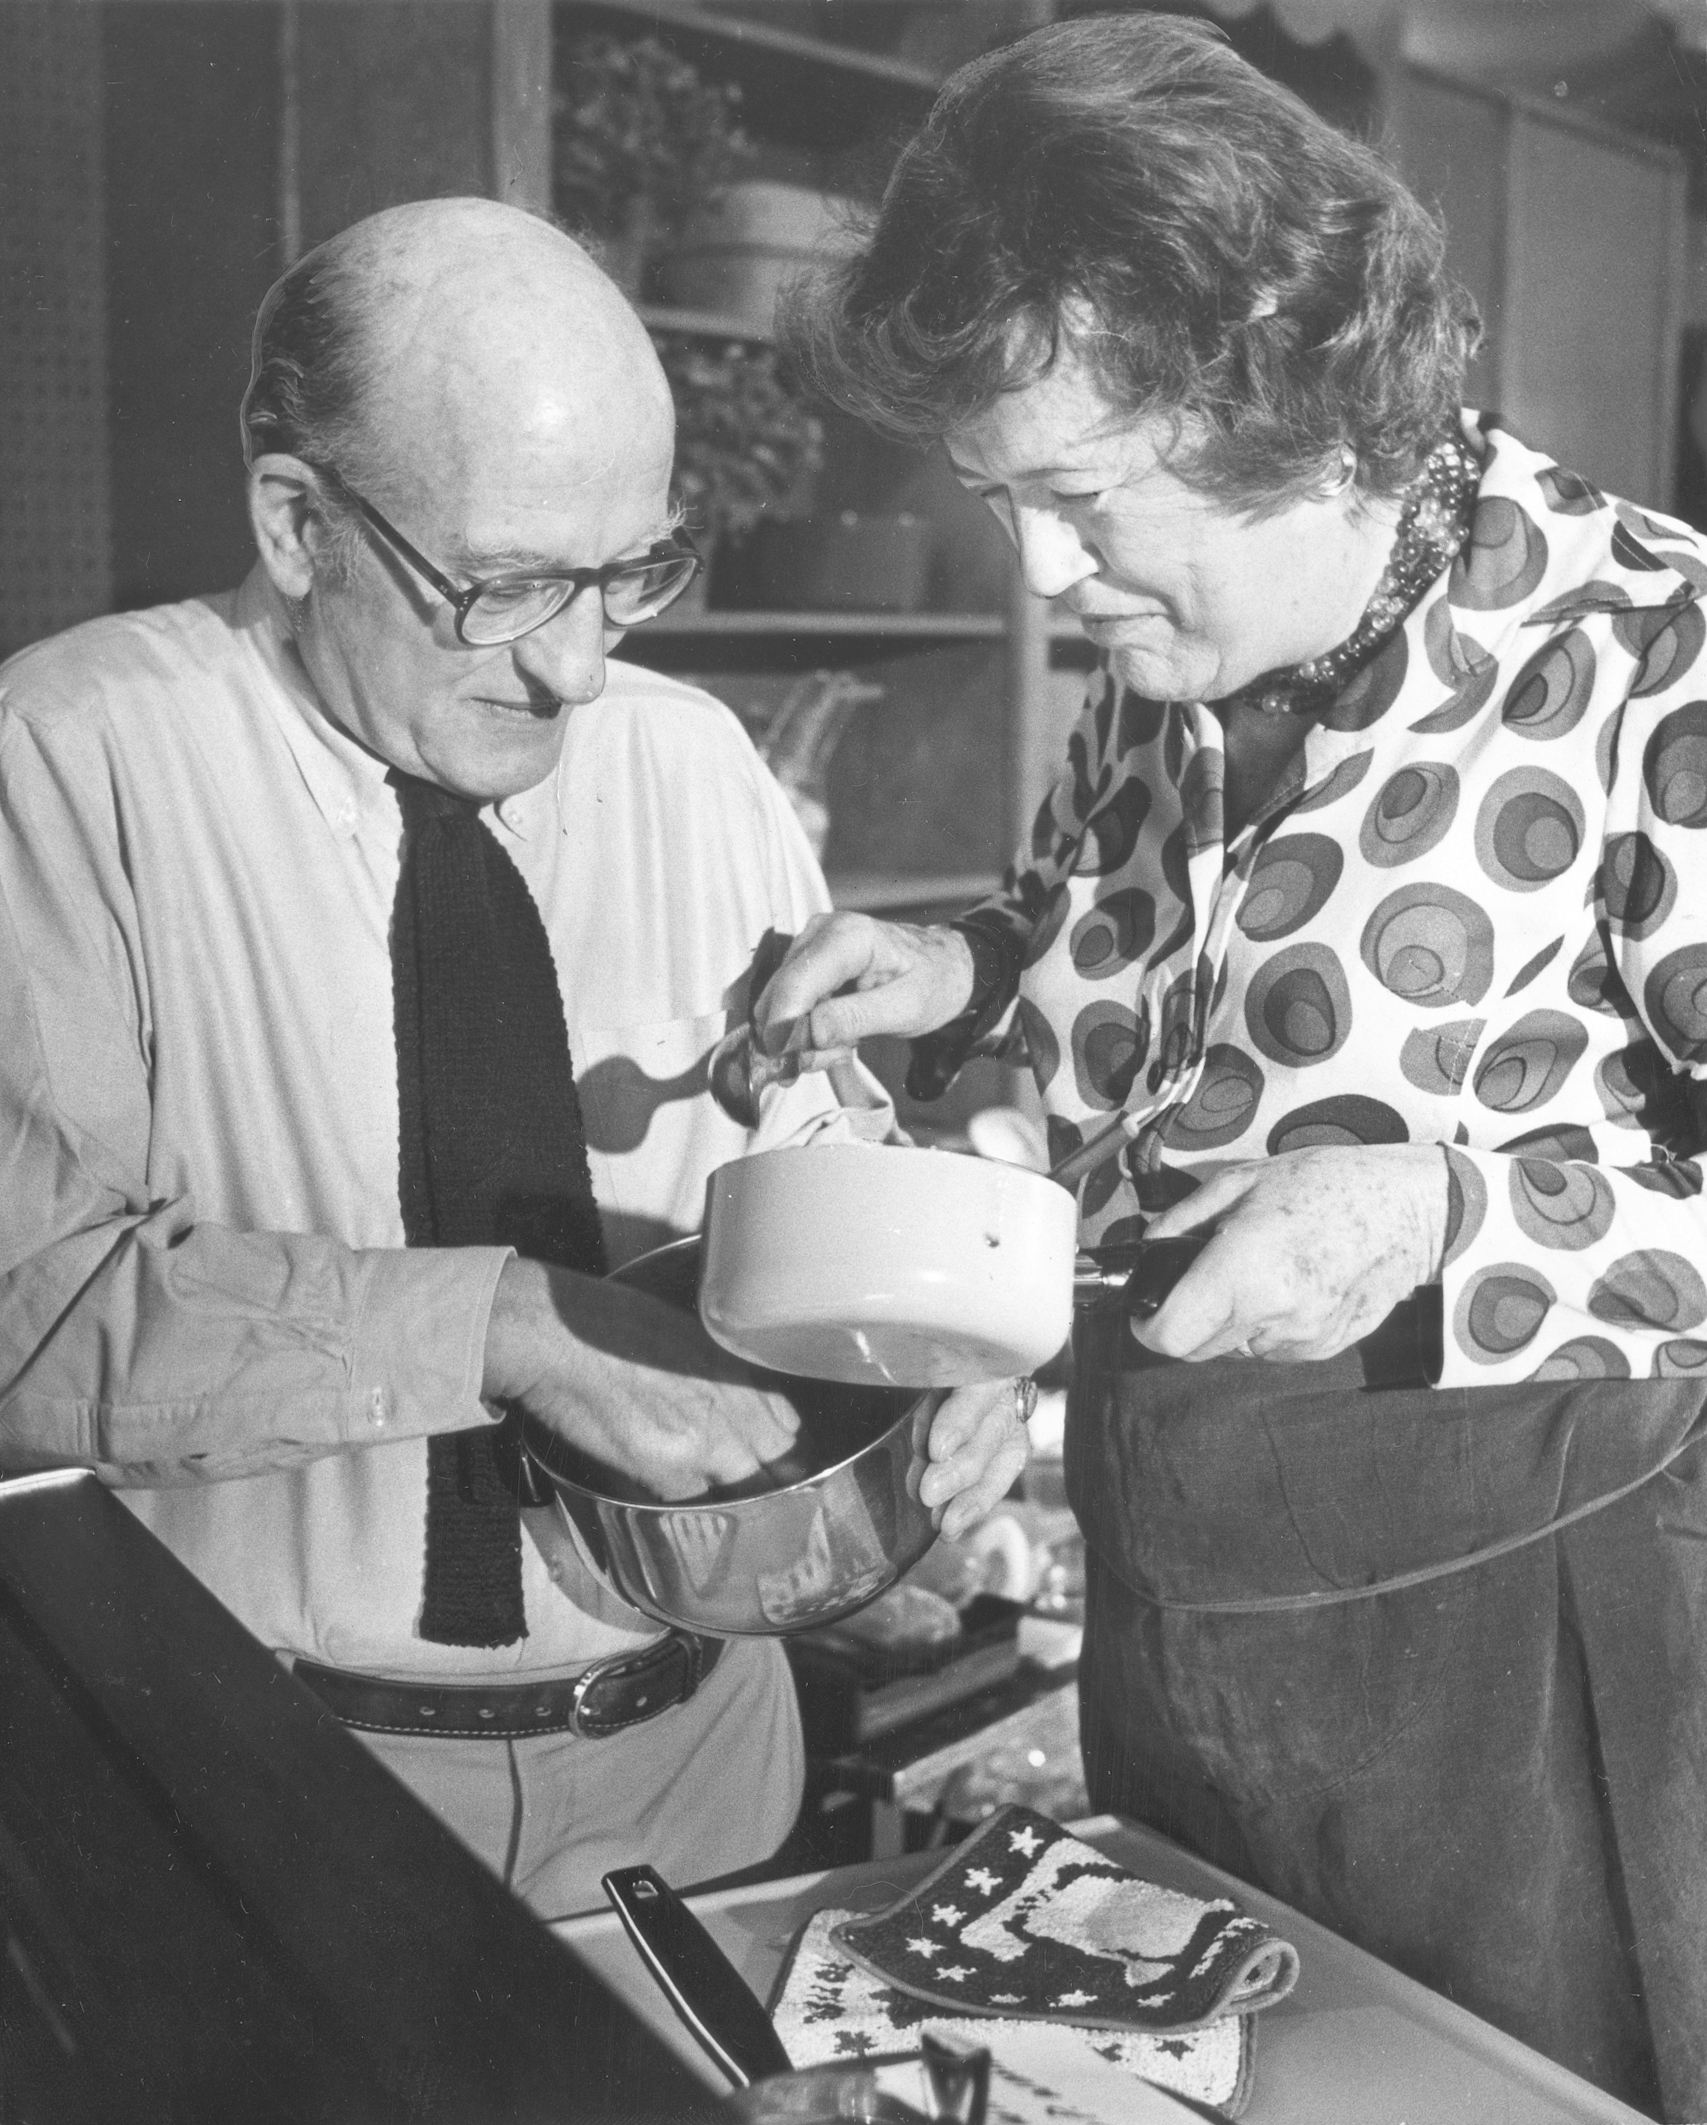 Julia Child recipes were perfected during cooking demonstrations, like the one seen here at the Shoreham Hotel in 1976